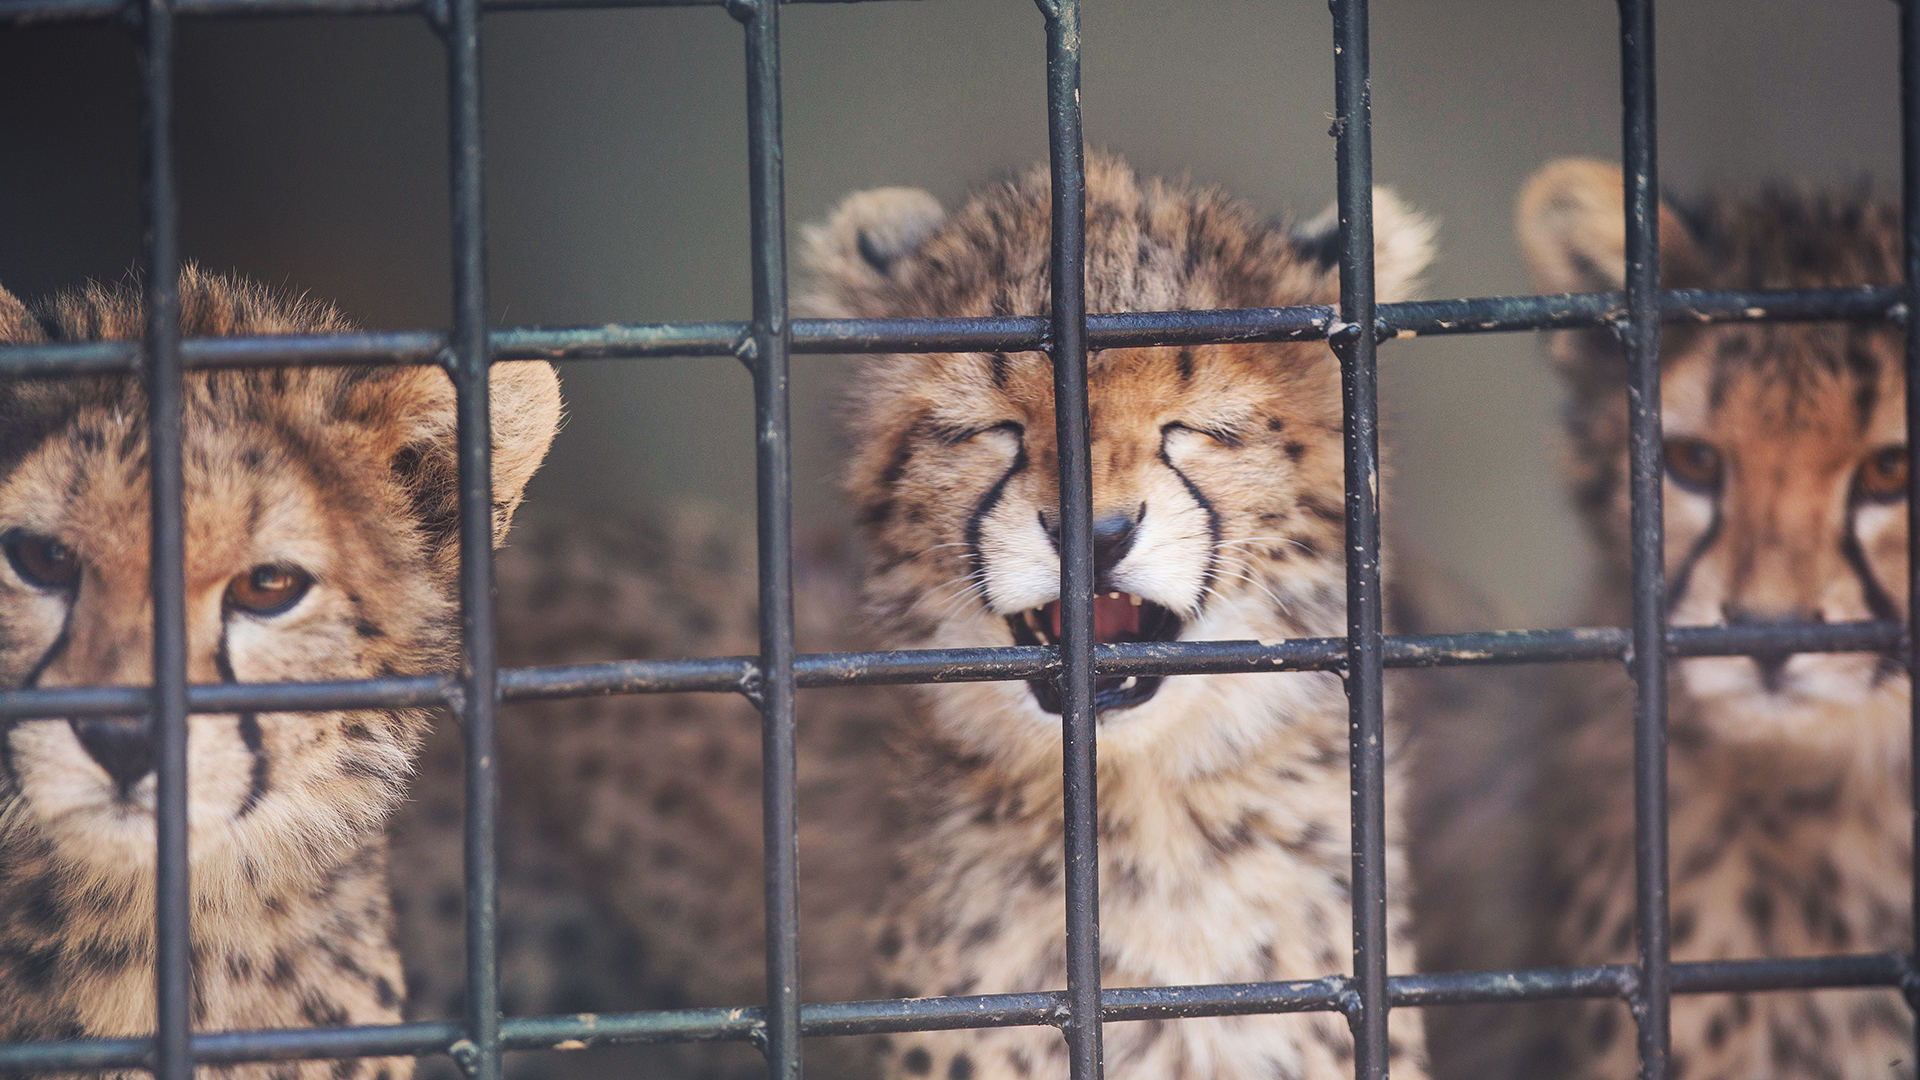 Three cheetah cubs look through bars, with the one in the middle opening its mouth with eyes shut